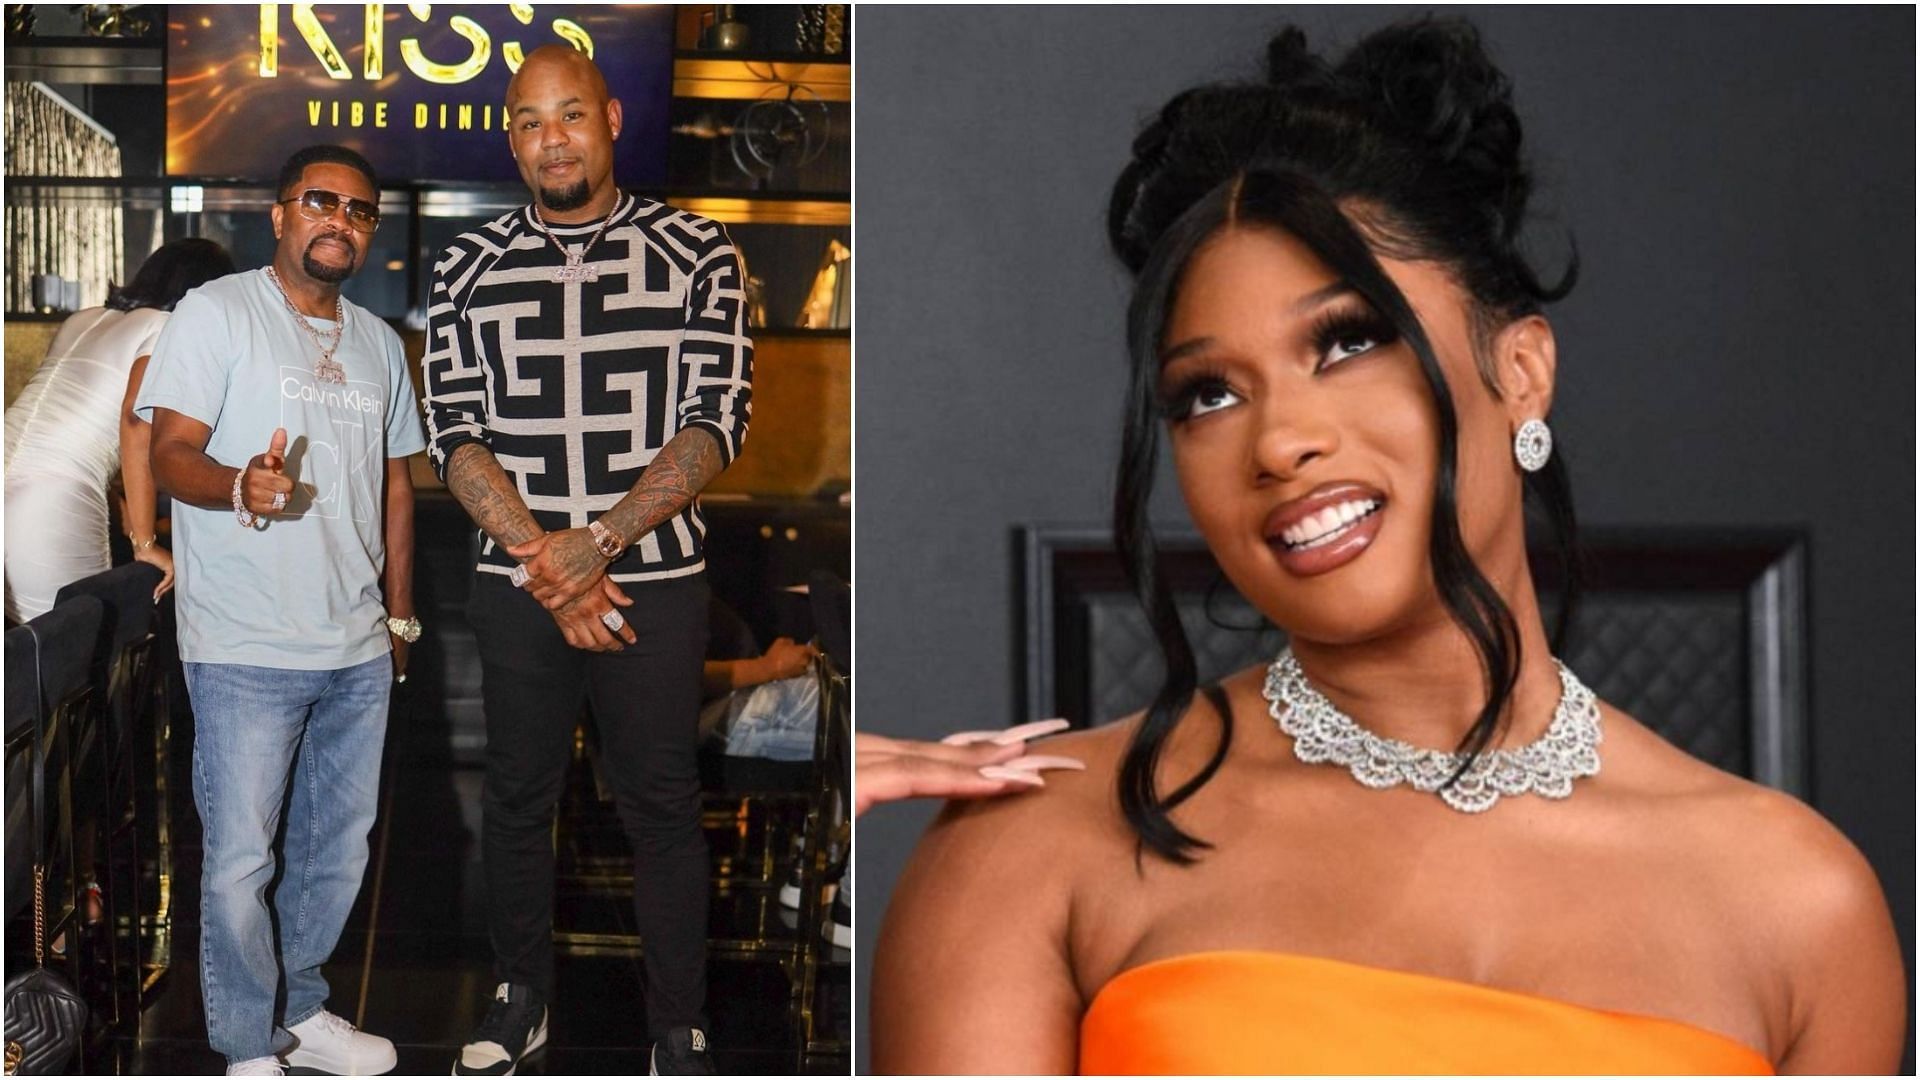 J Prince has defended Carl Crawford in lawsuit filed by Megan Thee Stallion. (Image via Instagram and Getty)